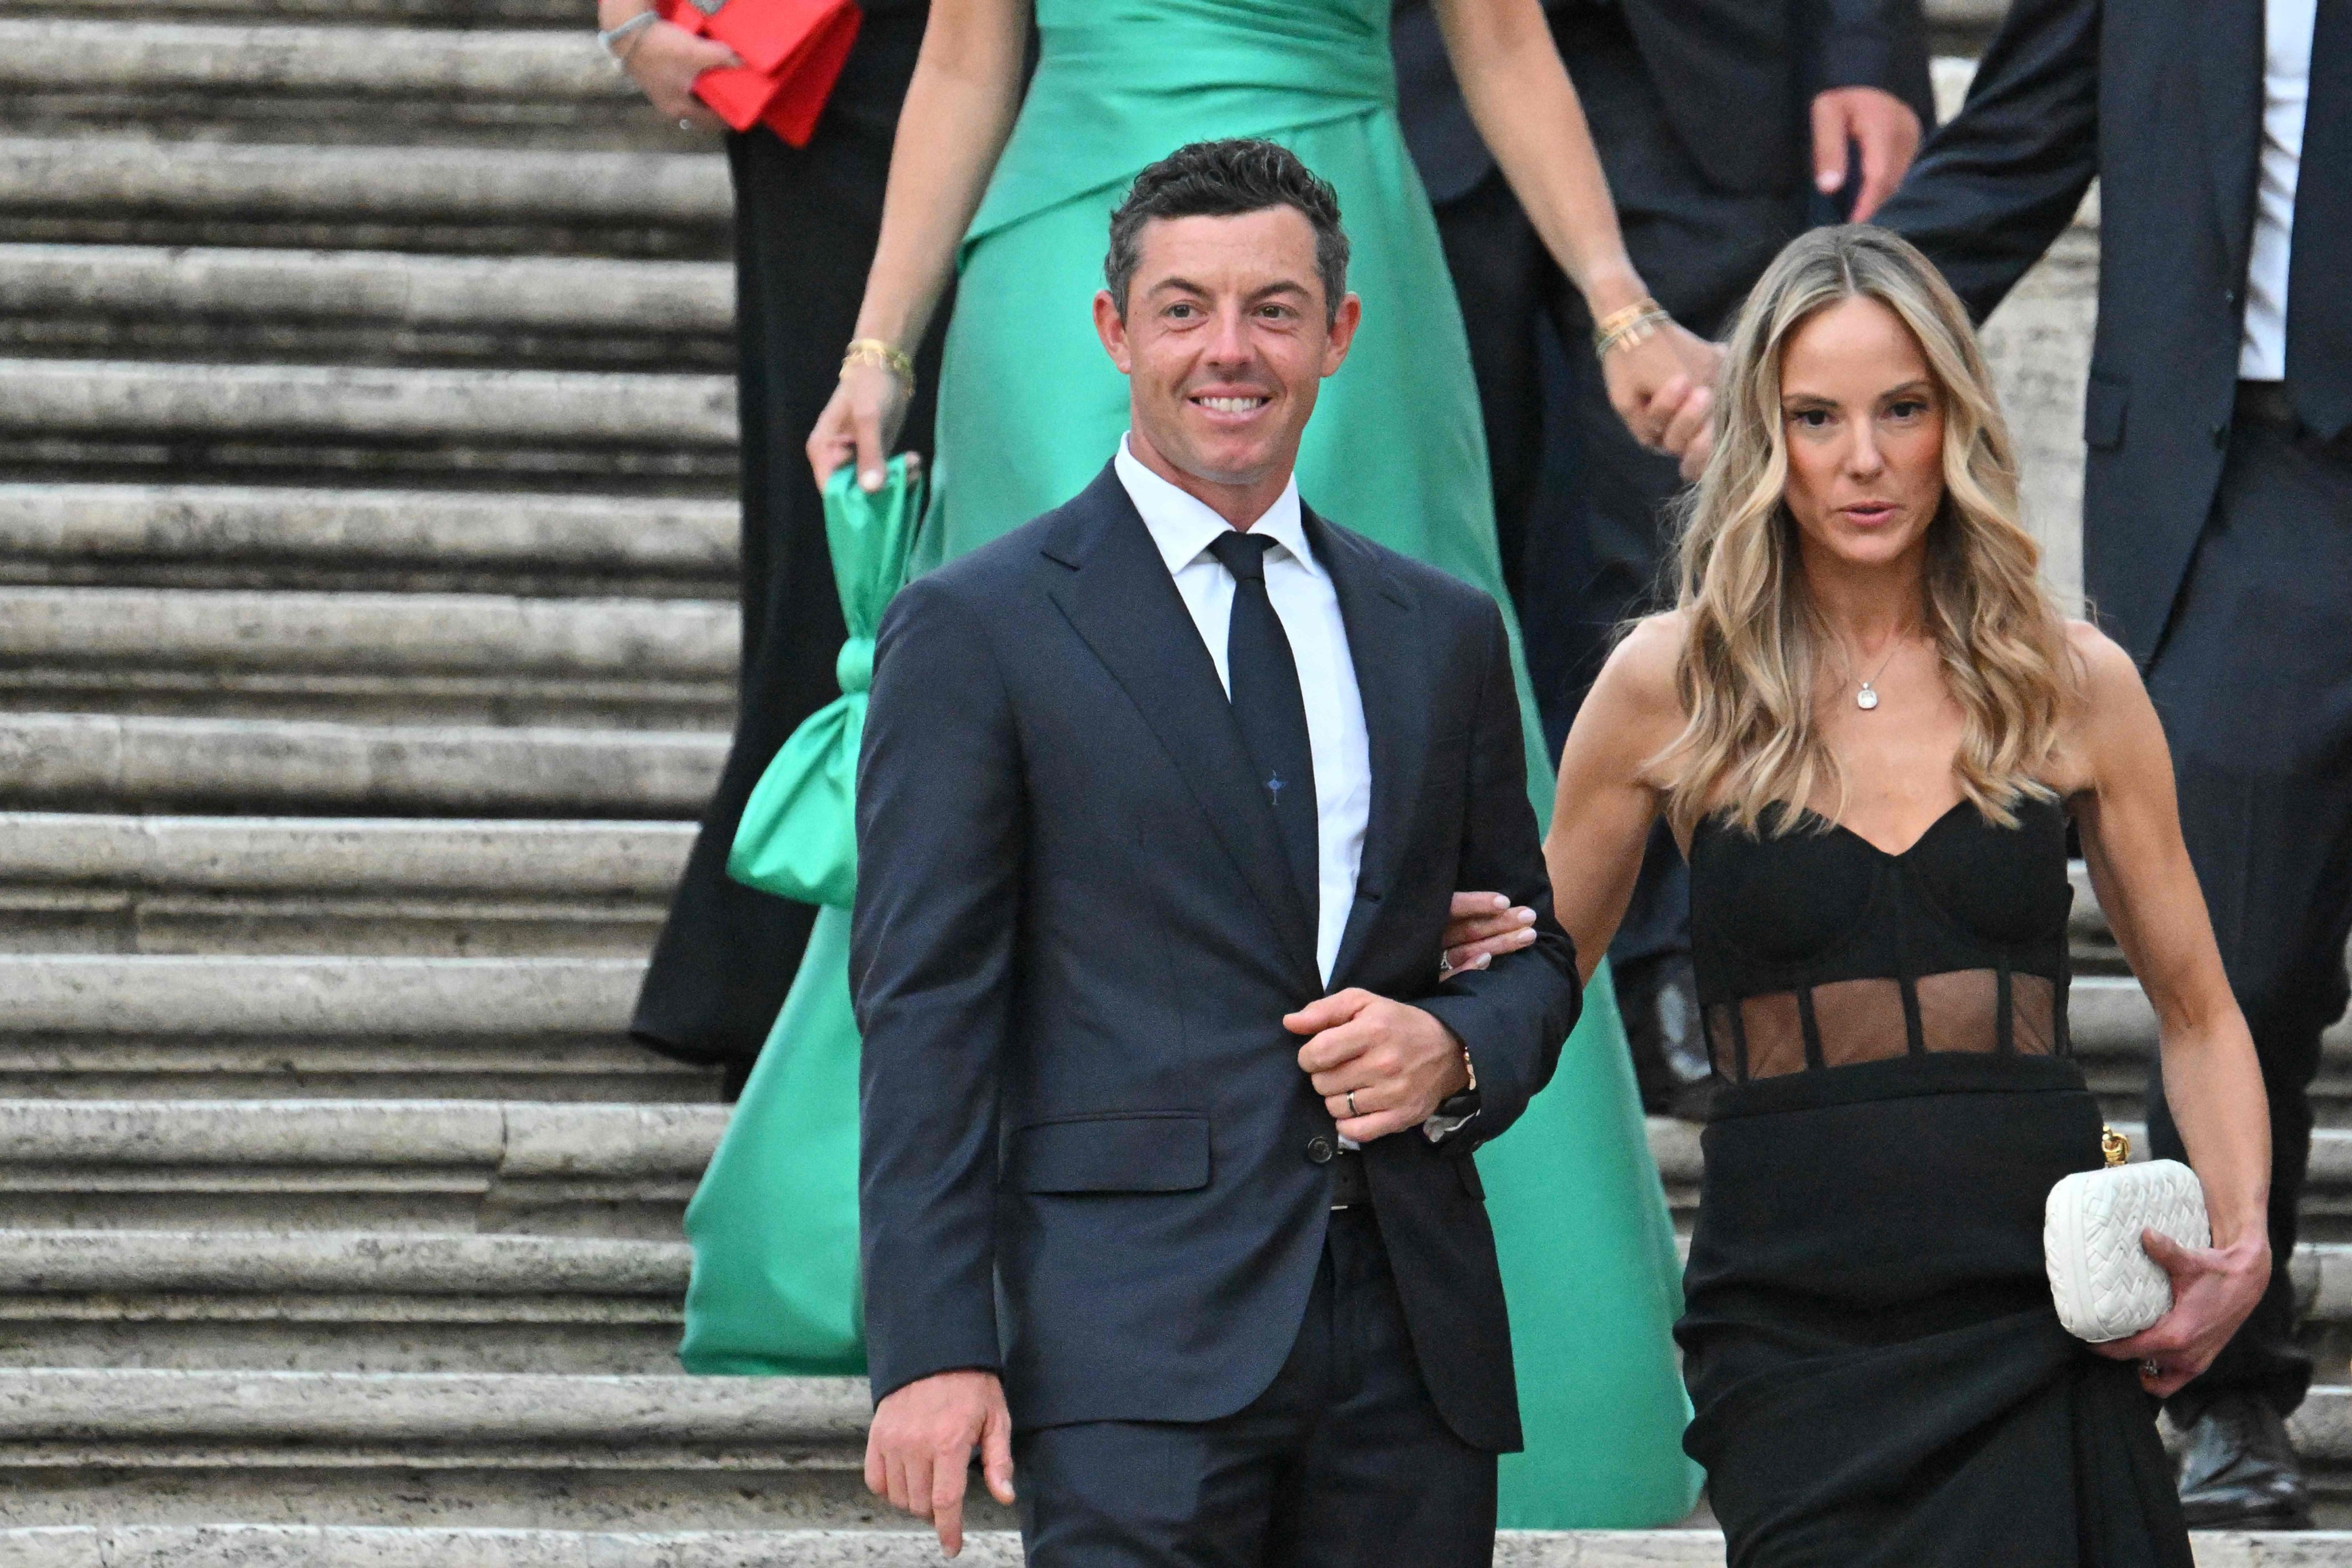 McIlroy has filed for divorce from his wife, Erica Stroll, submitting the documents in Florida on Monday — the day after he won at Quail Hollow. Photo: AFP